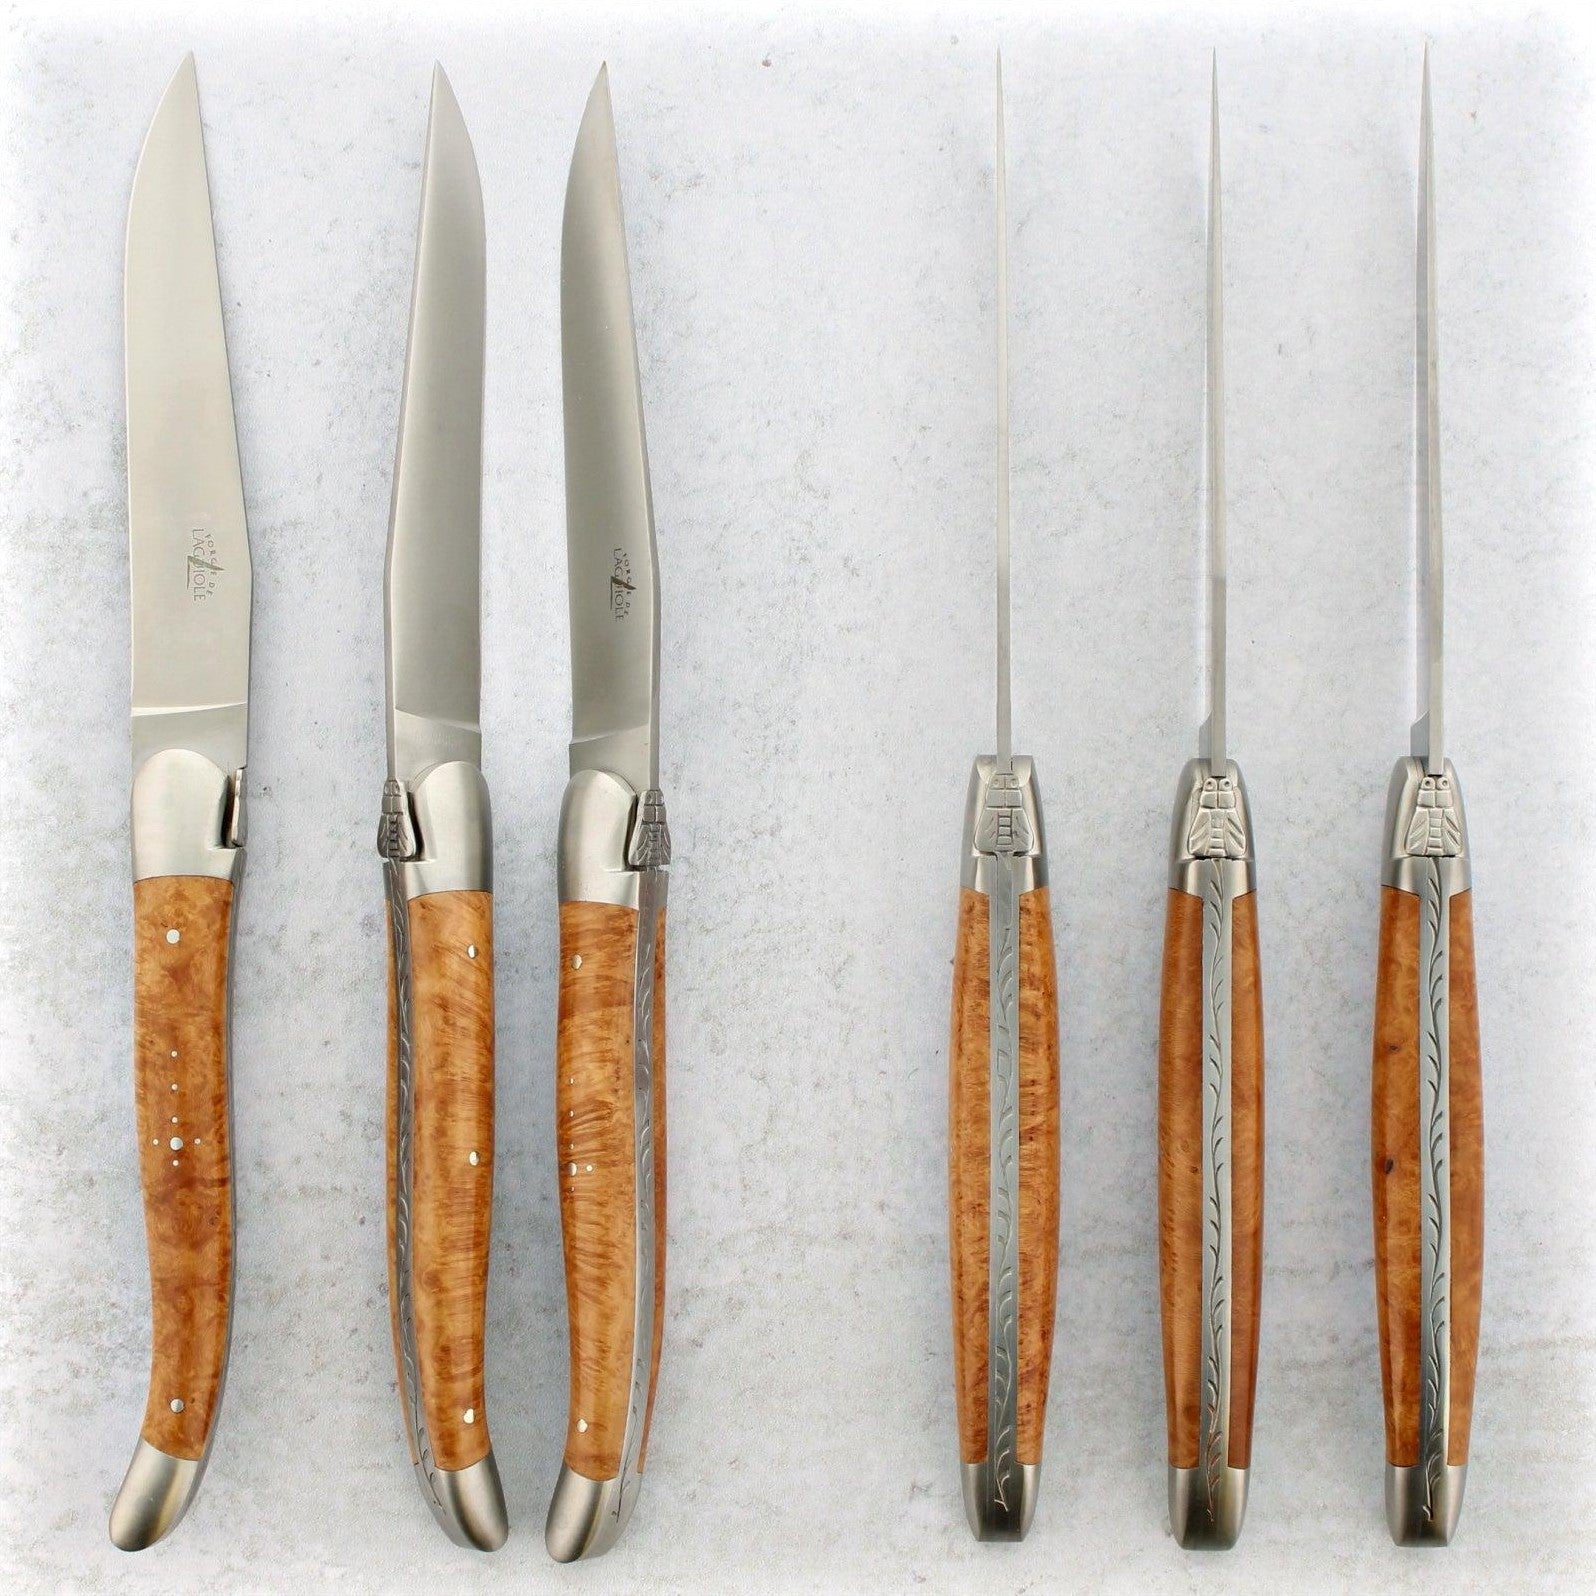 Steak Knives Wooden Handle Serrated Knife Set 8 box Wood Stainless Steel